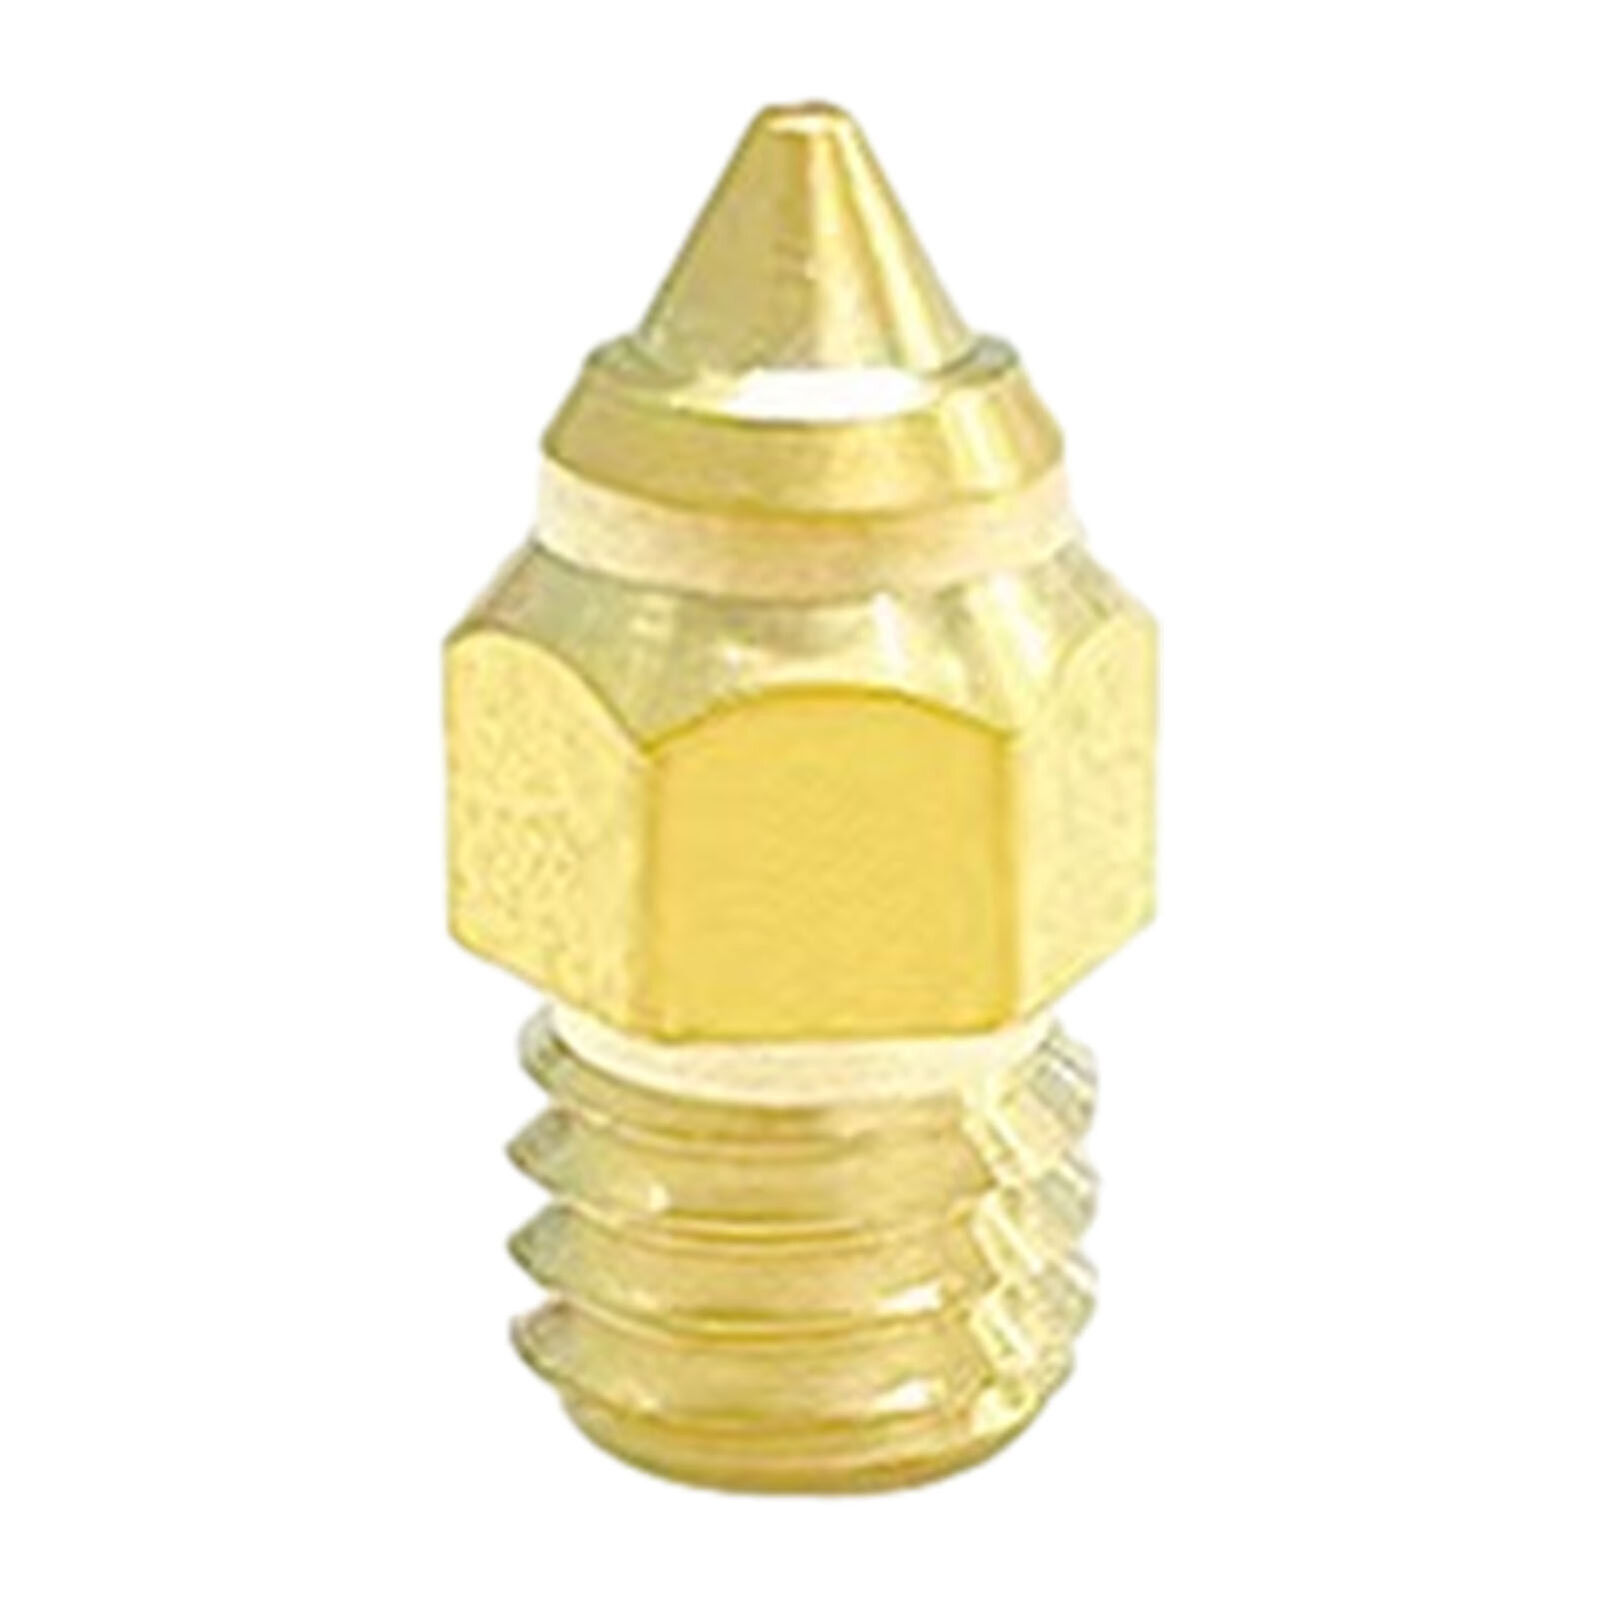 3D Printer Nozzle with Chromium Coating For Most Of The 3D Printers